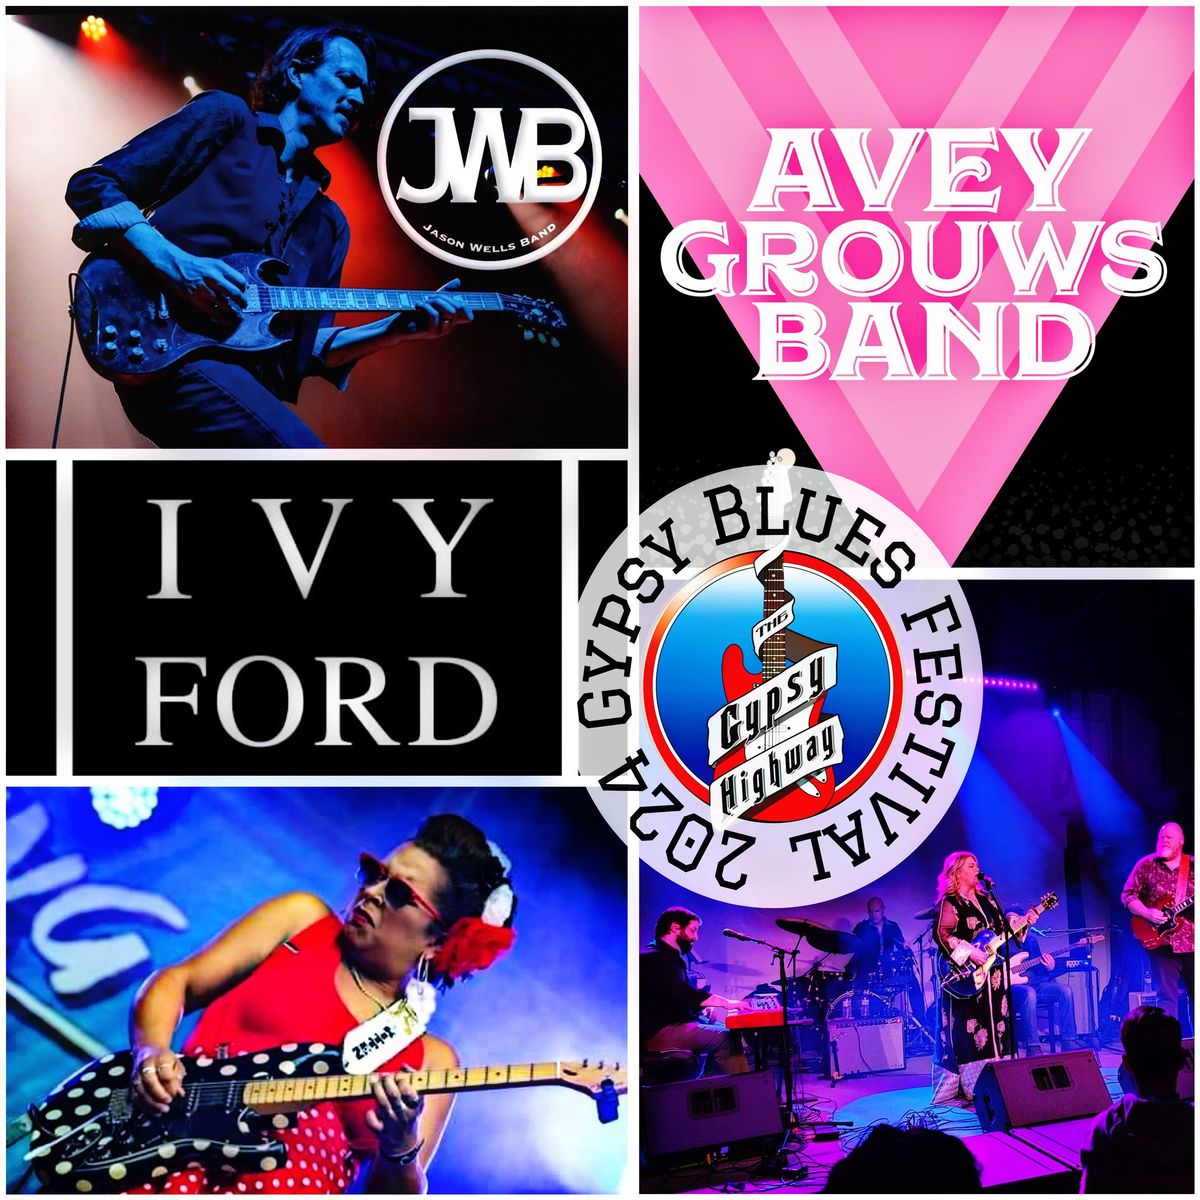 2024 Gypsy Blues Festival featuring Avey Grouws Band, Ivy Ford Band, and Jason Wells Band